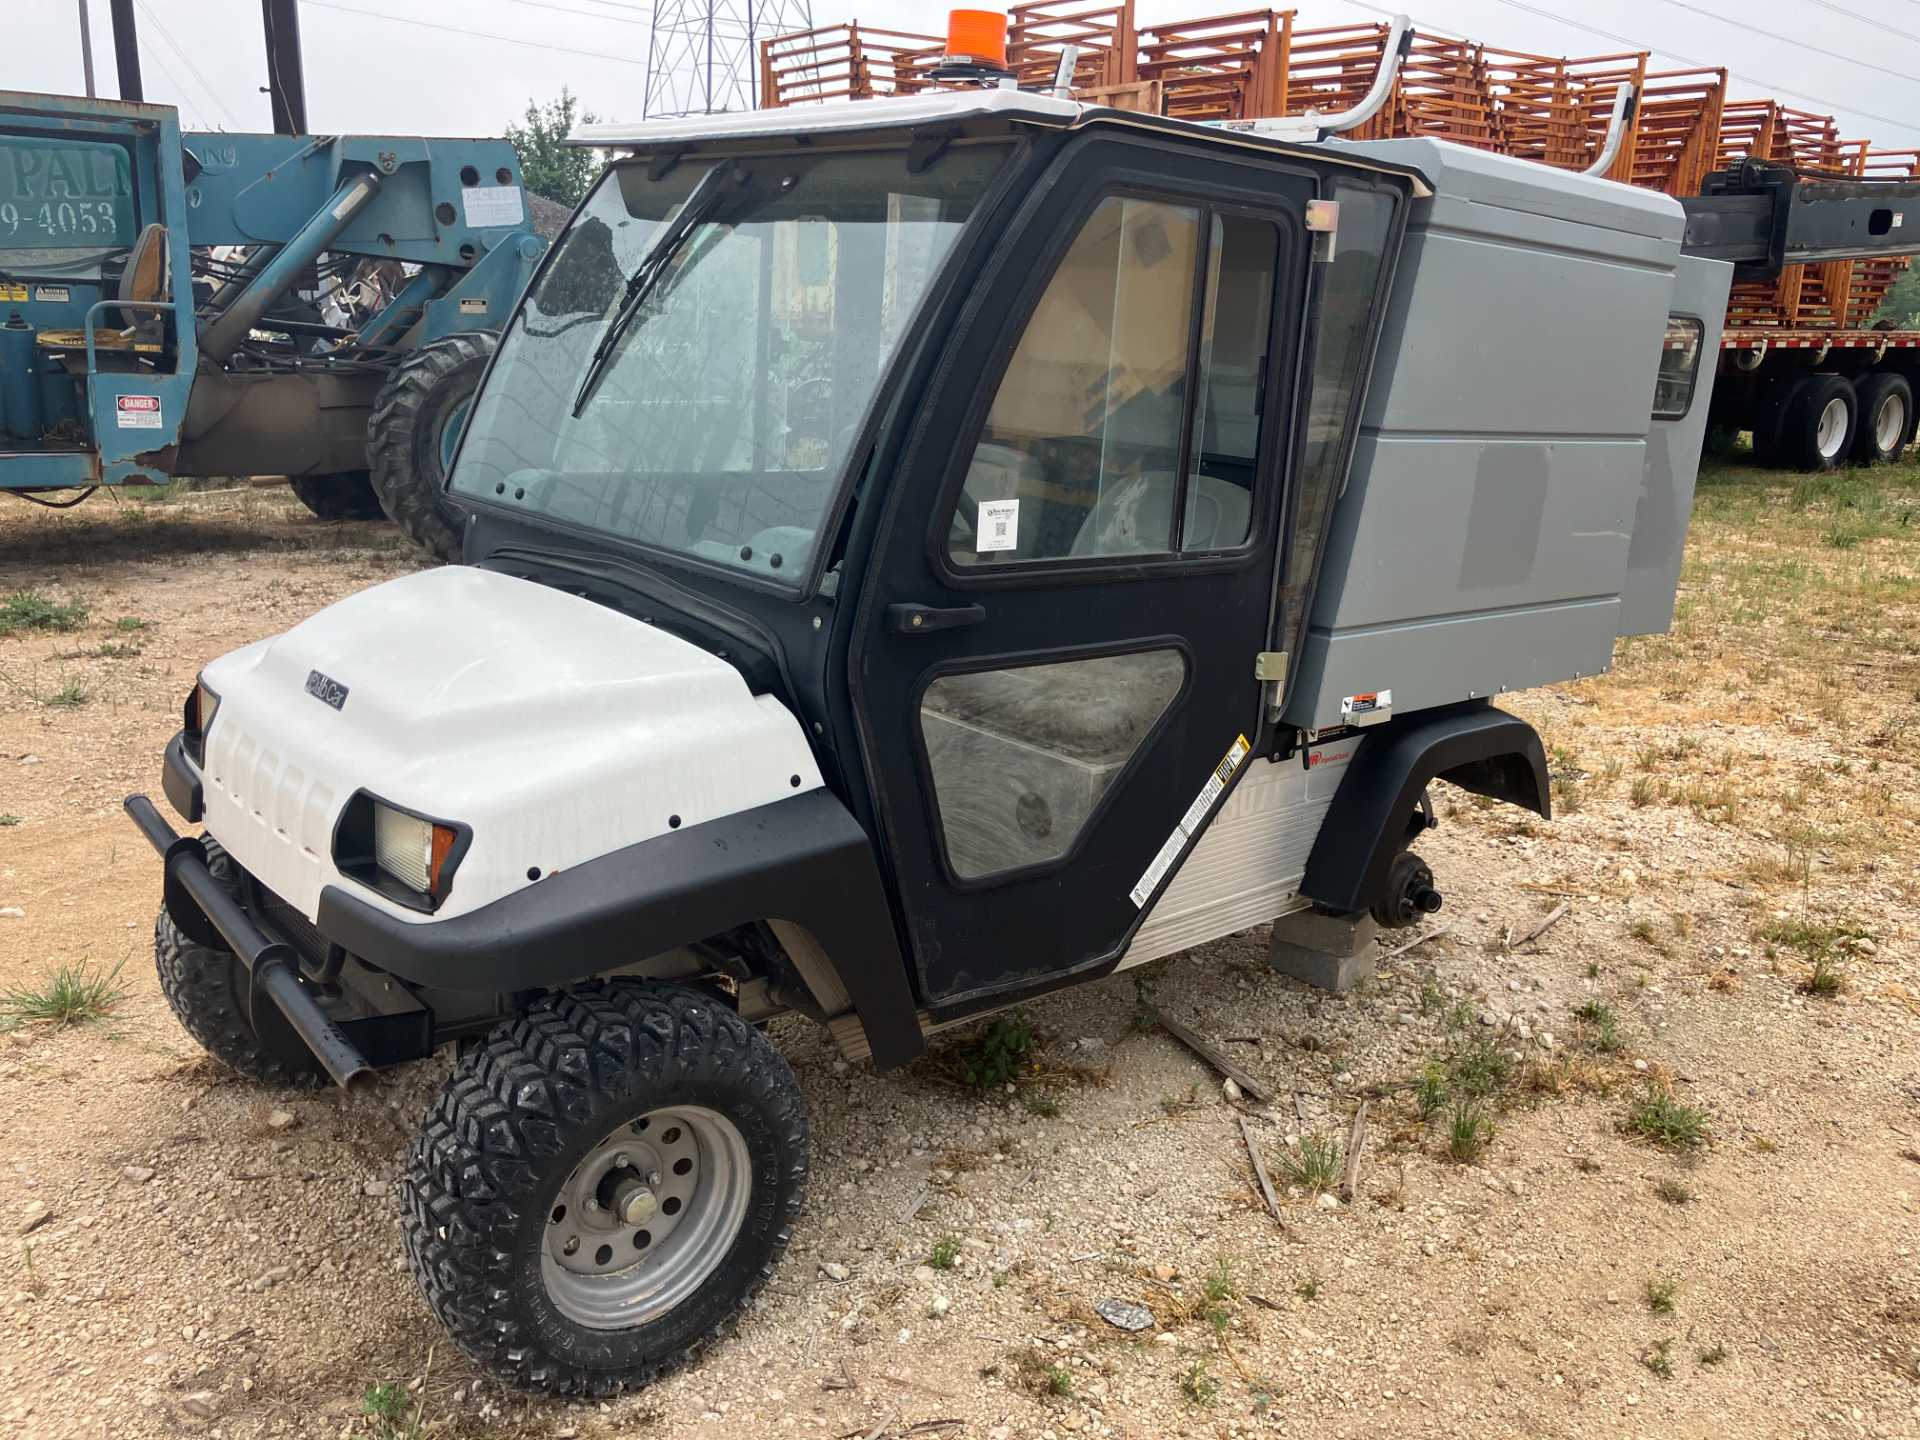 Club Car CarryAll 272 Gas powered cart 959 hours Year is 2006